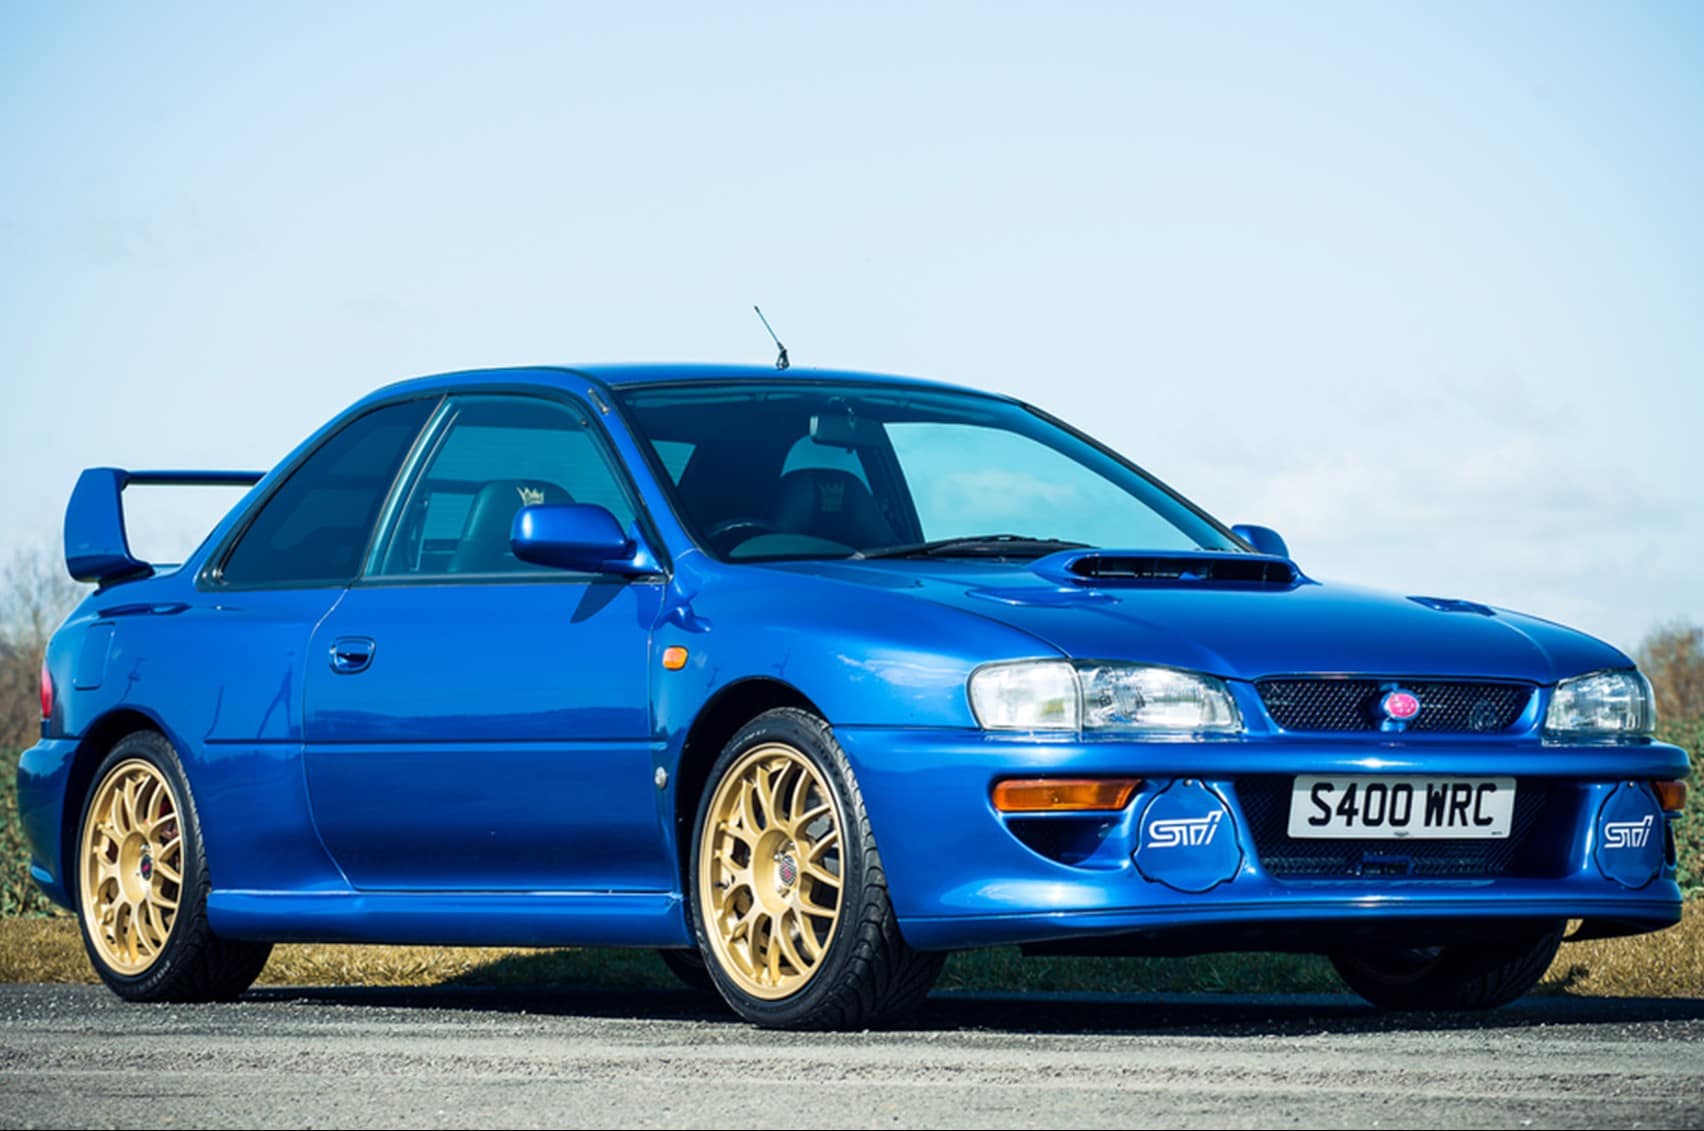 1998 Subaru Impreza STI 22B Expected to Sell for $100,000 at Auction